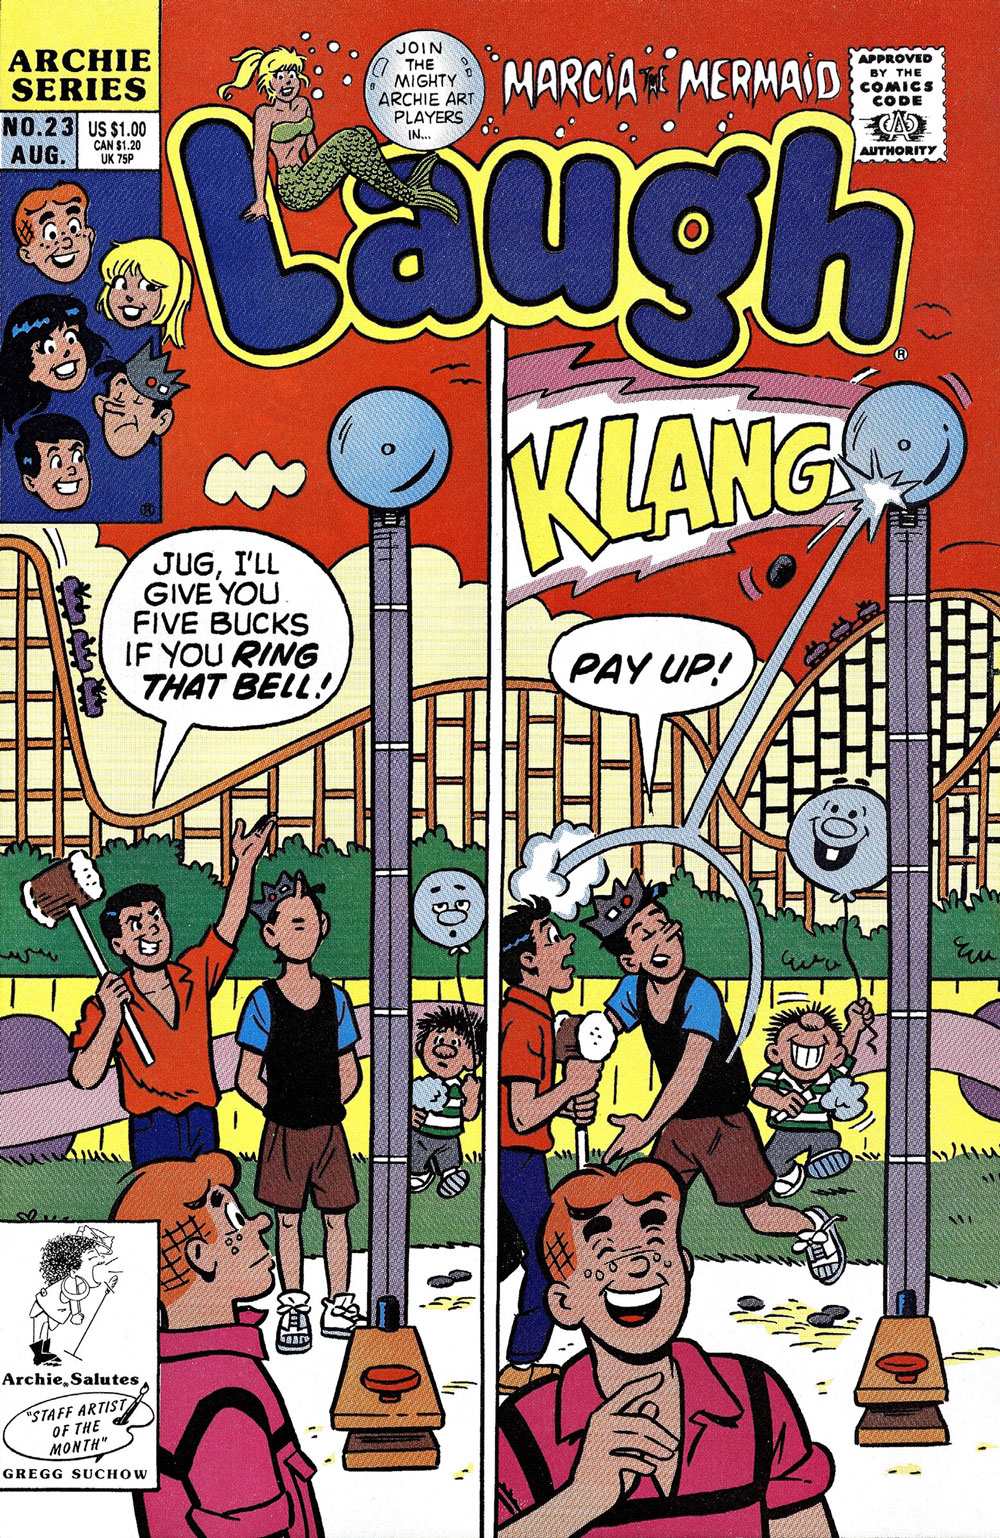 Cover of LAUGH #23. Archie, Jughead, and Reggie are at an amusement part. Archie holds a mallet at a test of strength attraction and offers Jughead $10 if he can ring the bell at the top. In the next panel, Jughead throws a rock at the bell, making it ring, and tells Reggie to pay up.